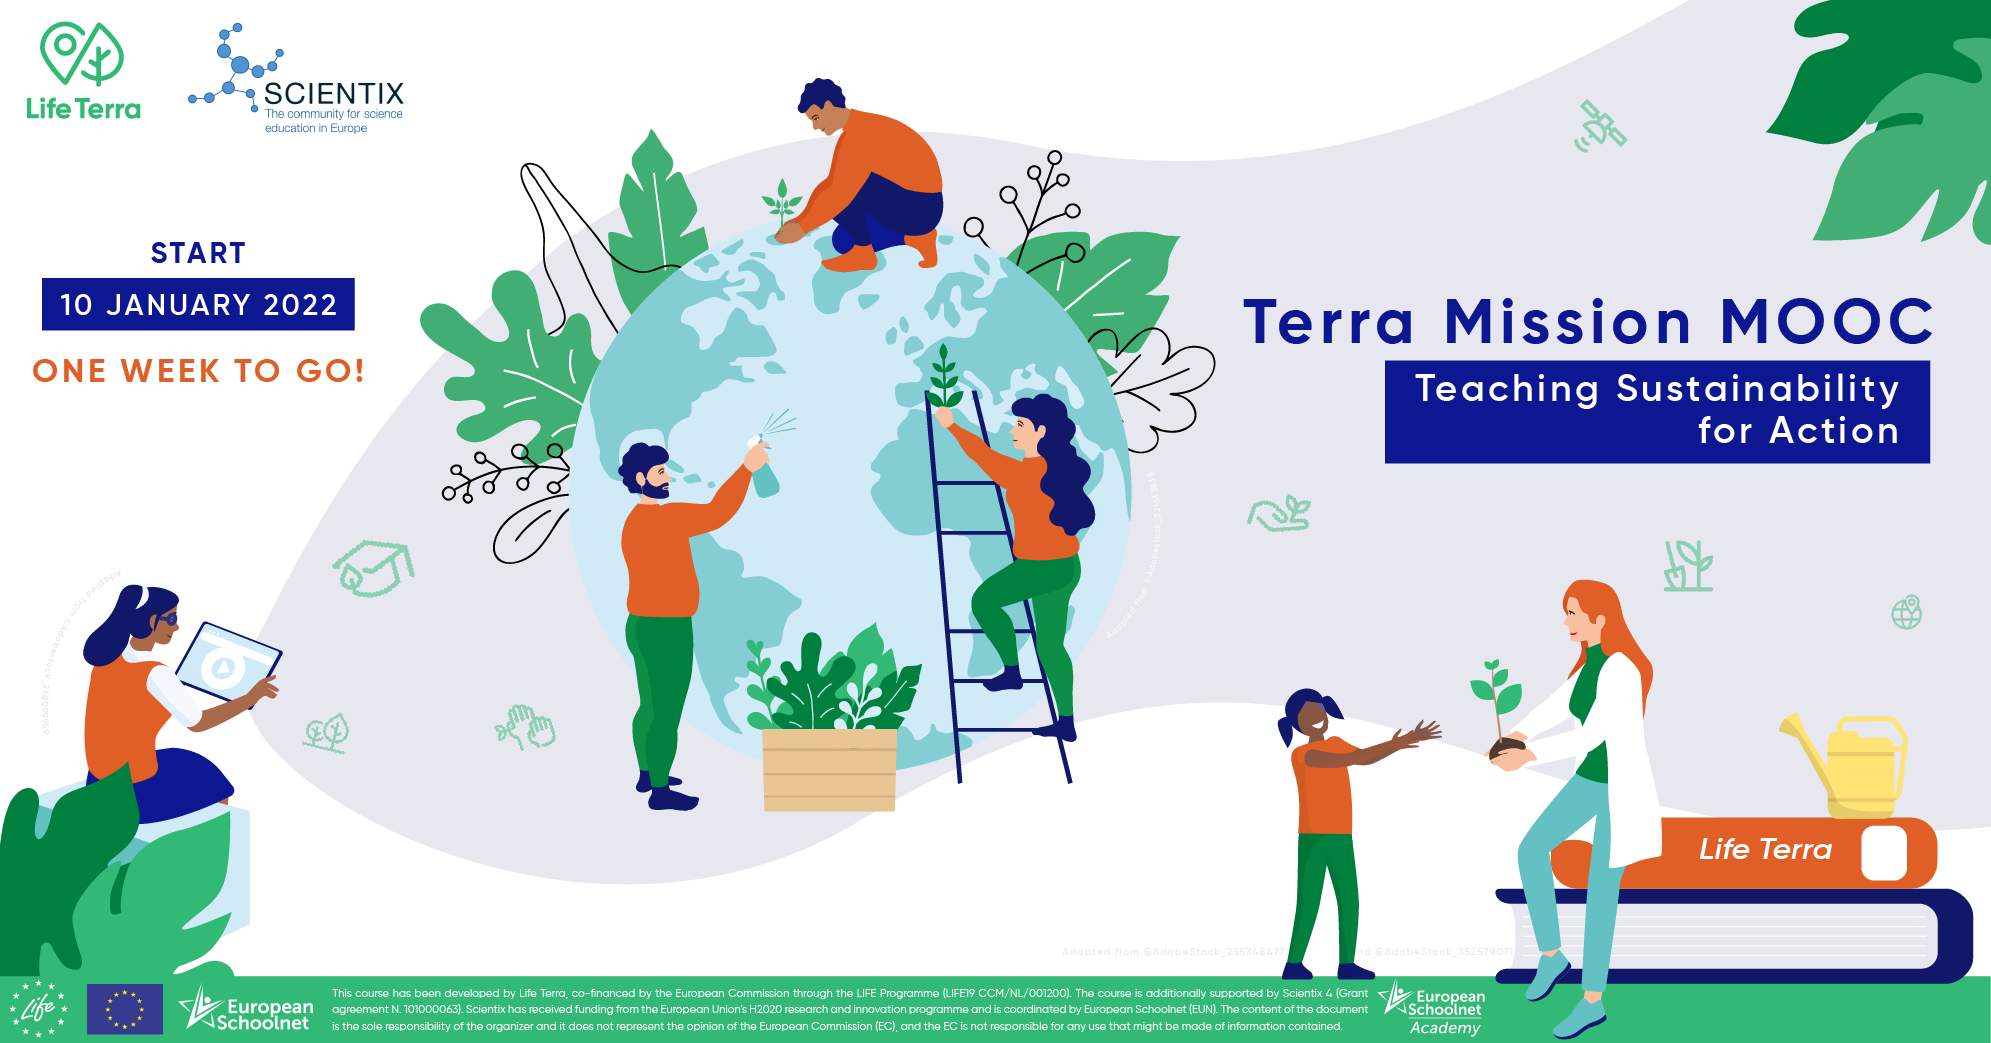 All Terra Mission MOOC resources remain open to join at any time!